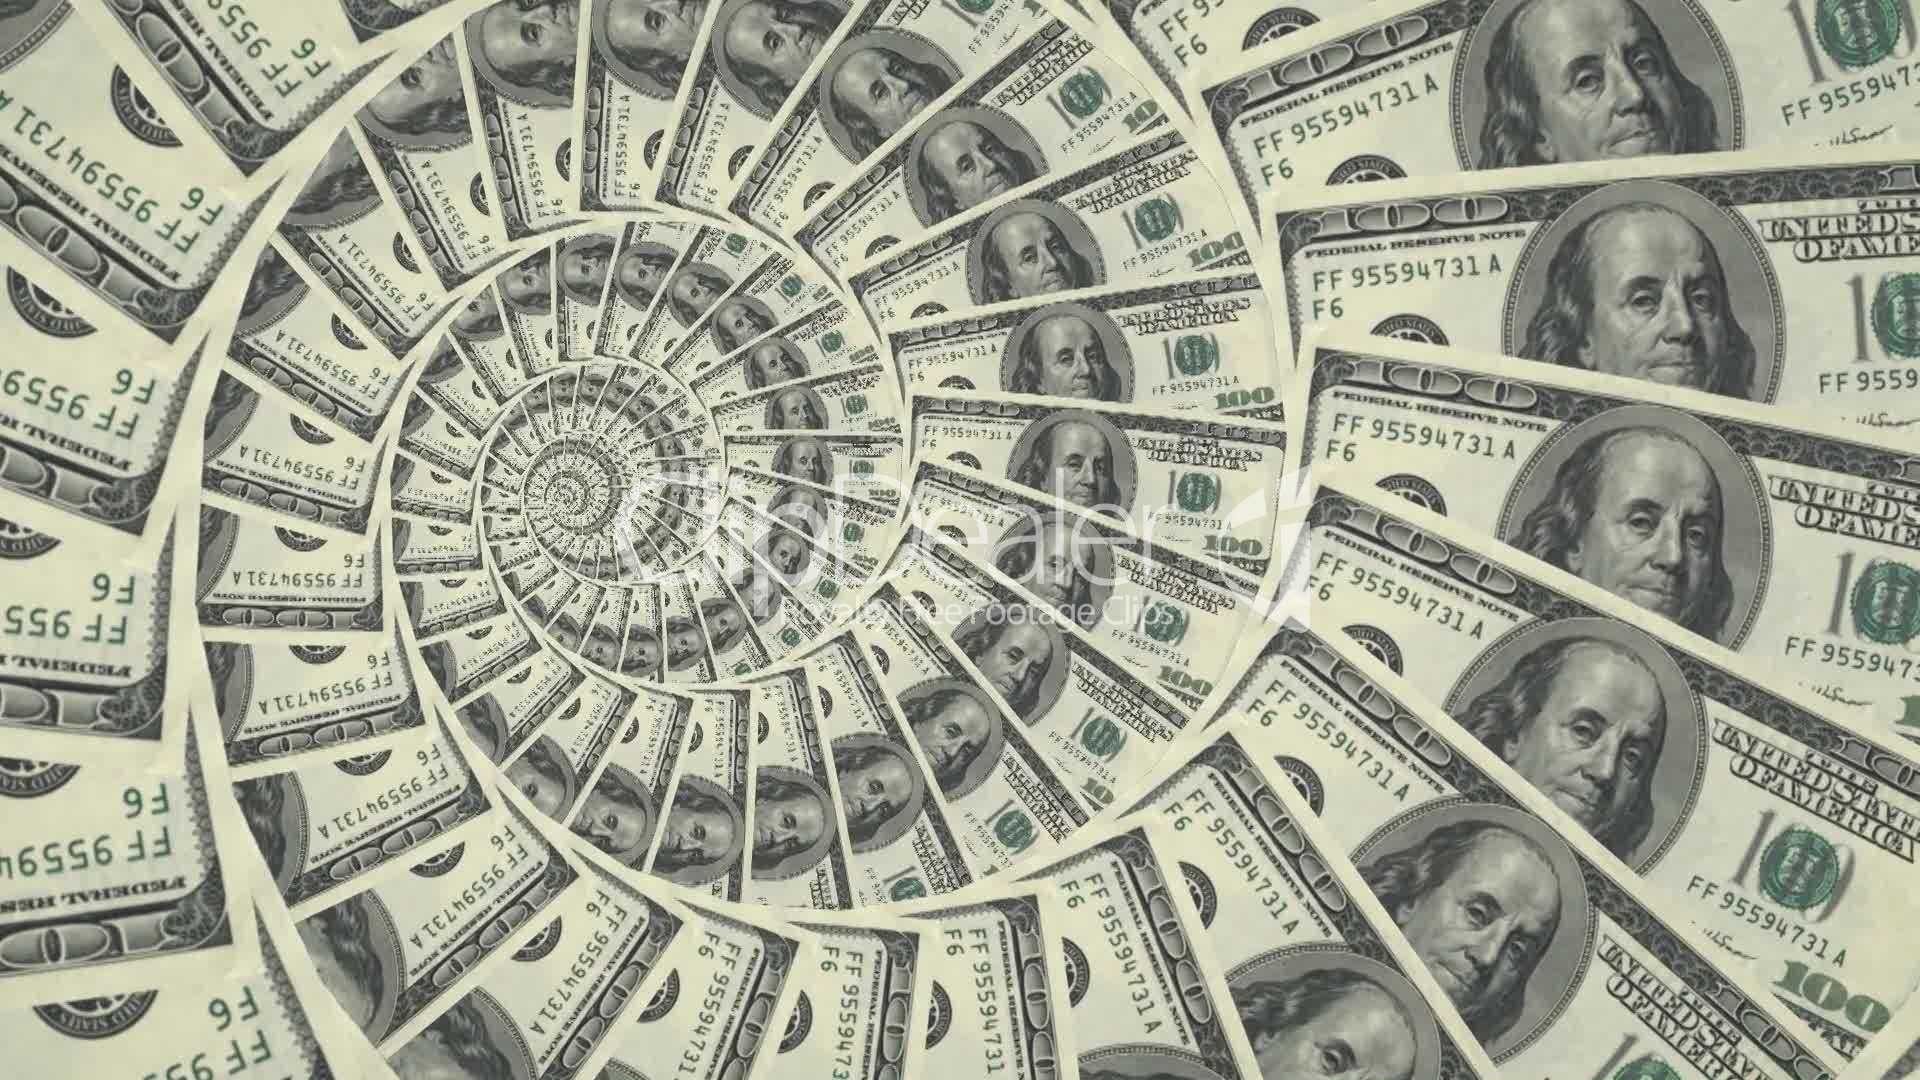 1920x1080 5716964 Adorable Money Images HDQ - HD Wallpapers